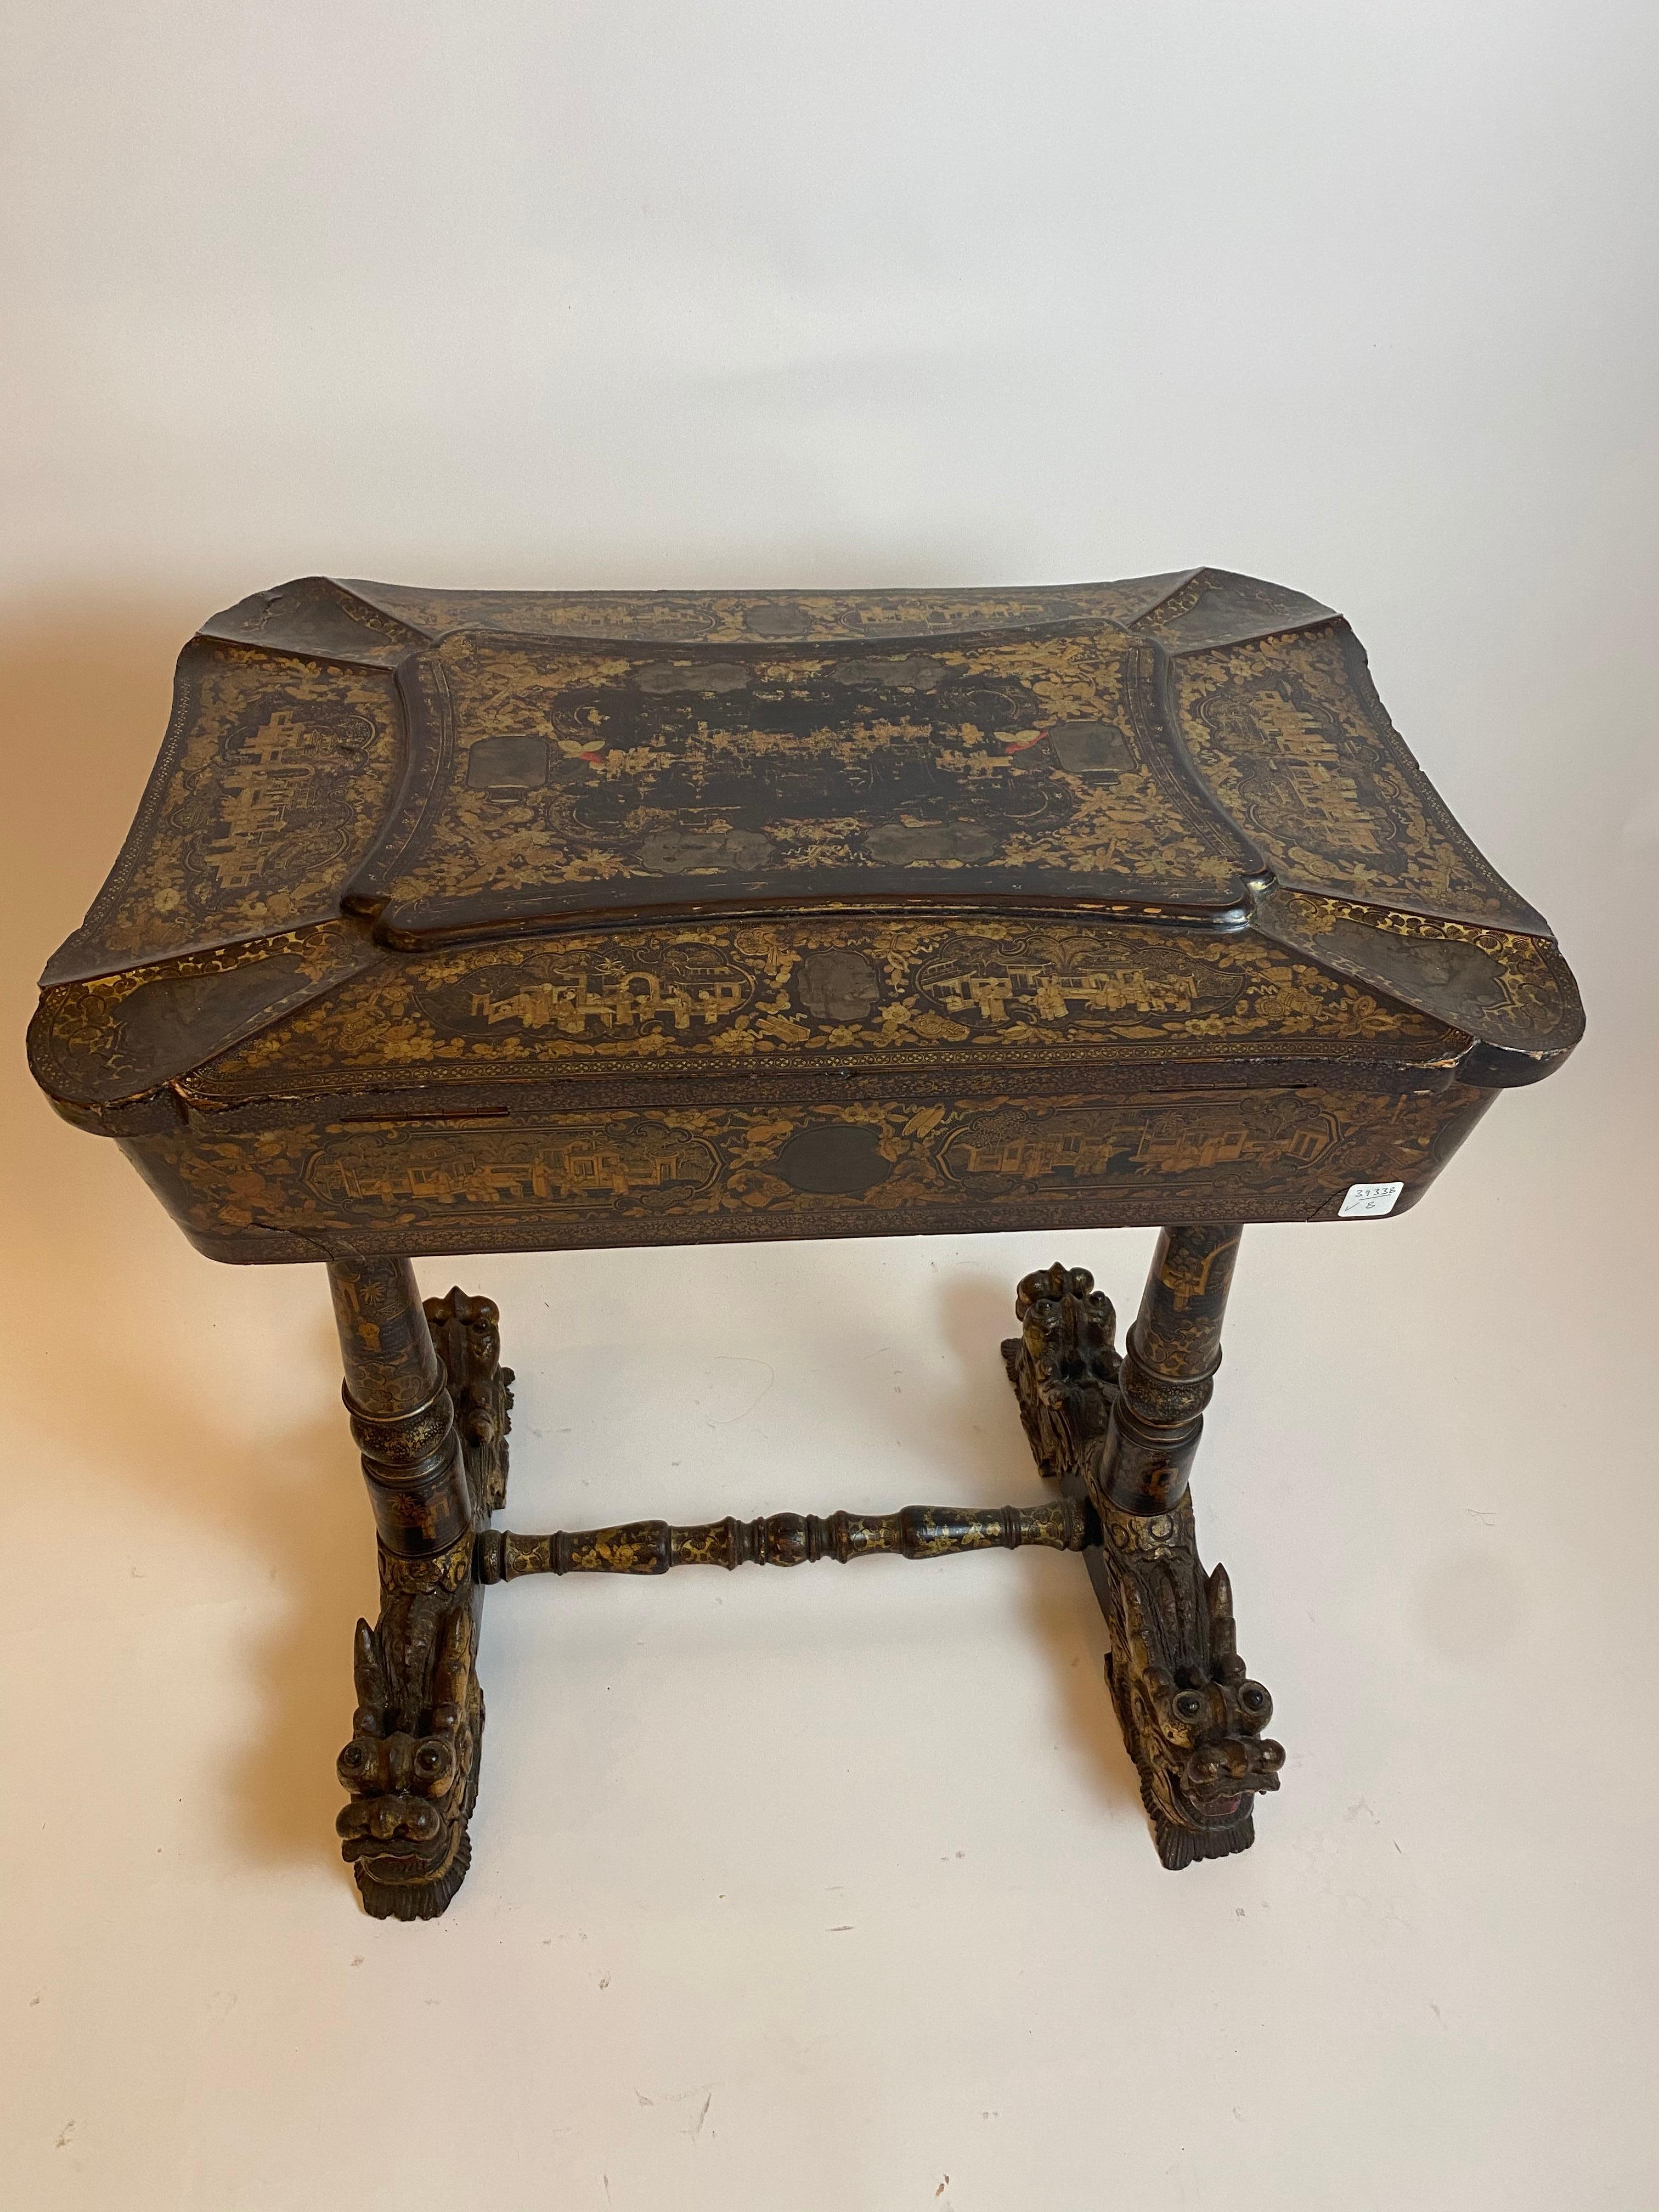 Early 19th Century Chinese Export Lacquer and Gilt Work Table For Sale 10